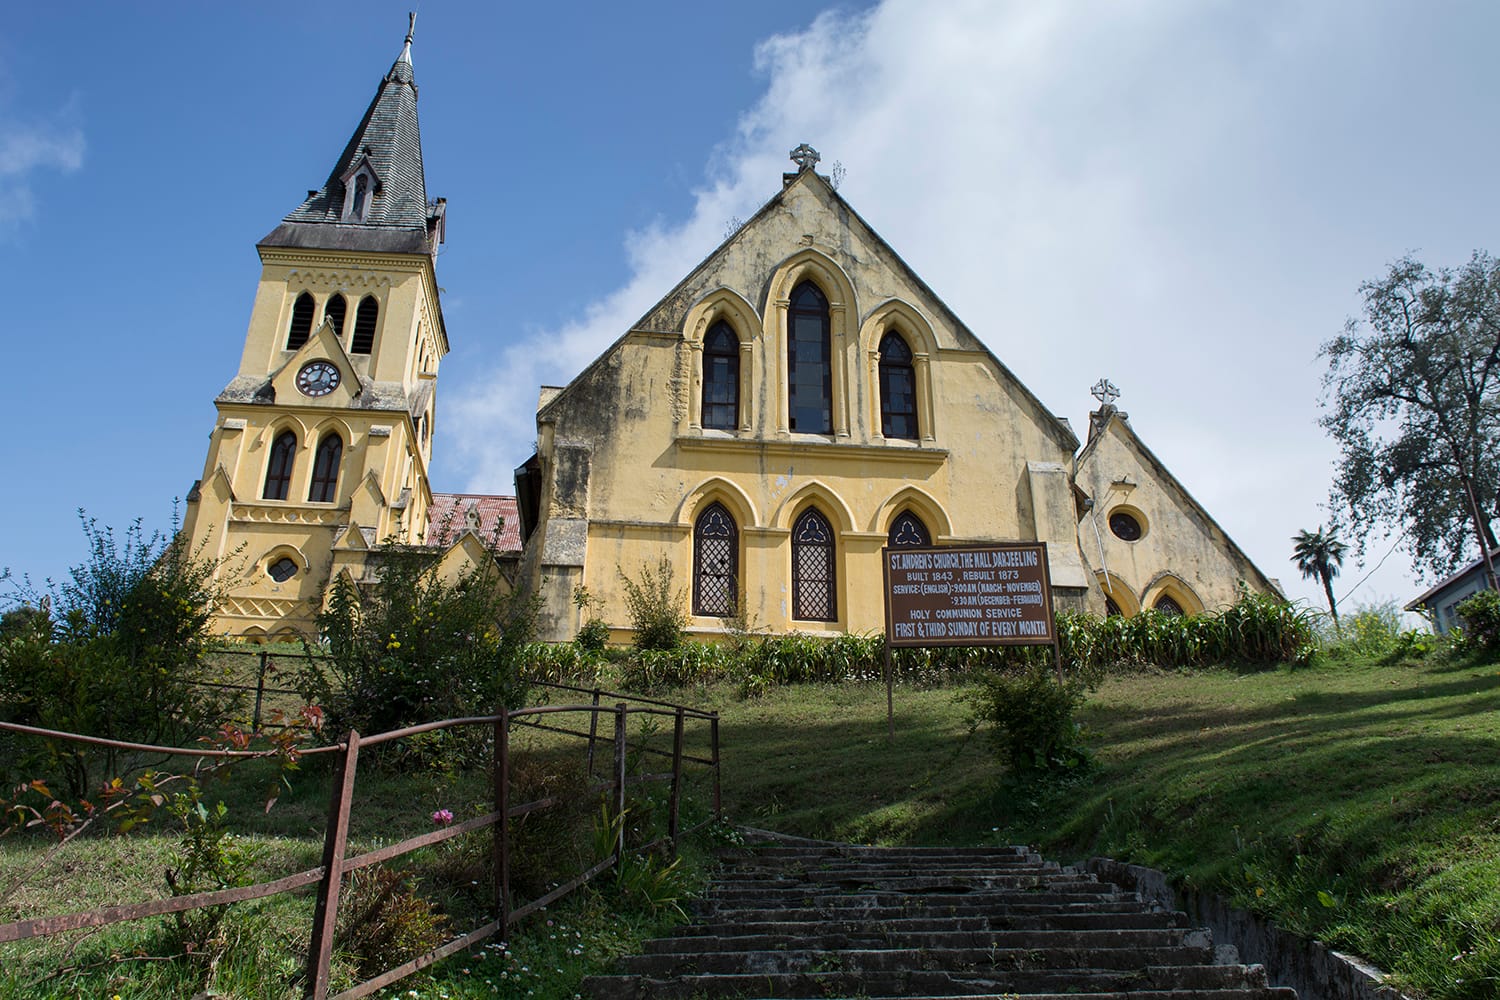 St Andrews Church set atop a hill opposite bhanu bhawan in Darjeeling, West Bengal, India.